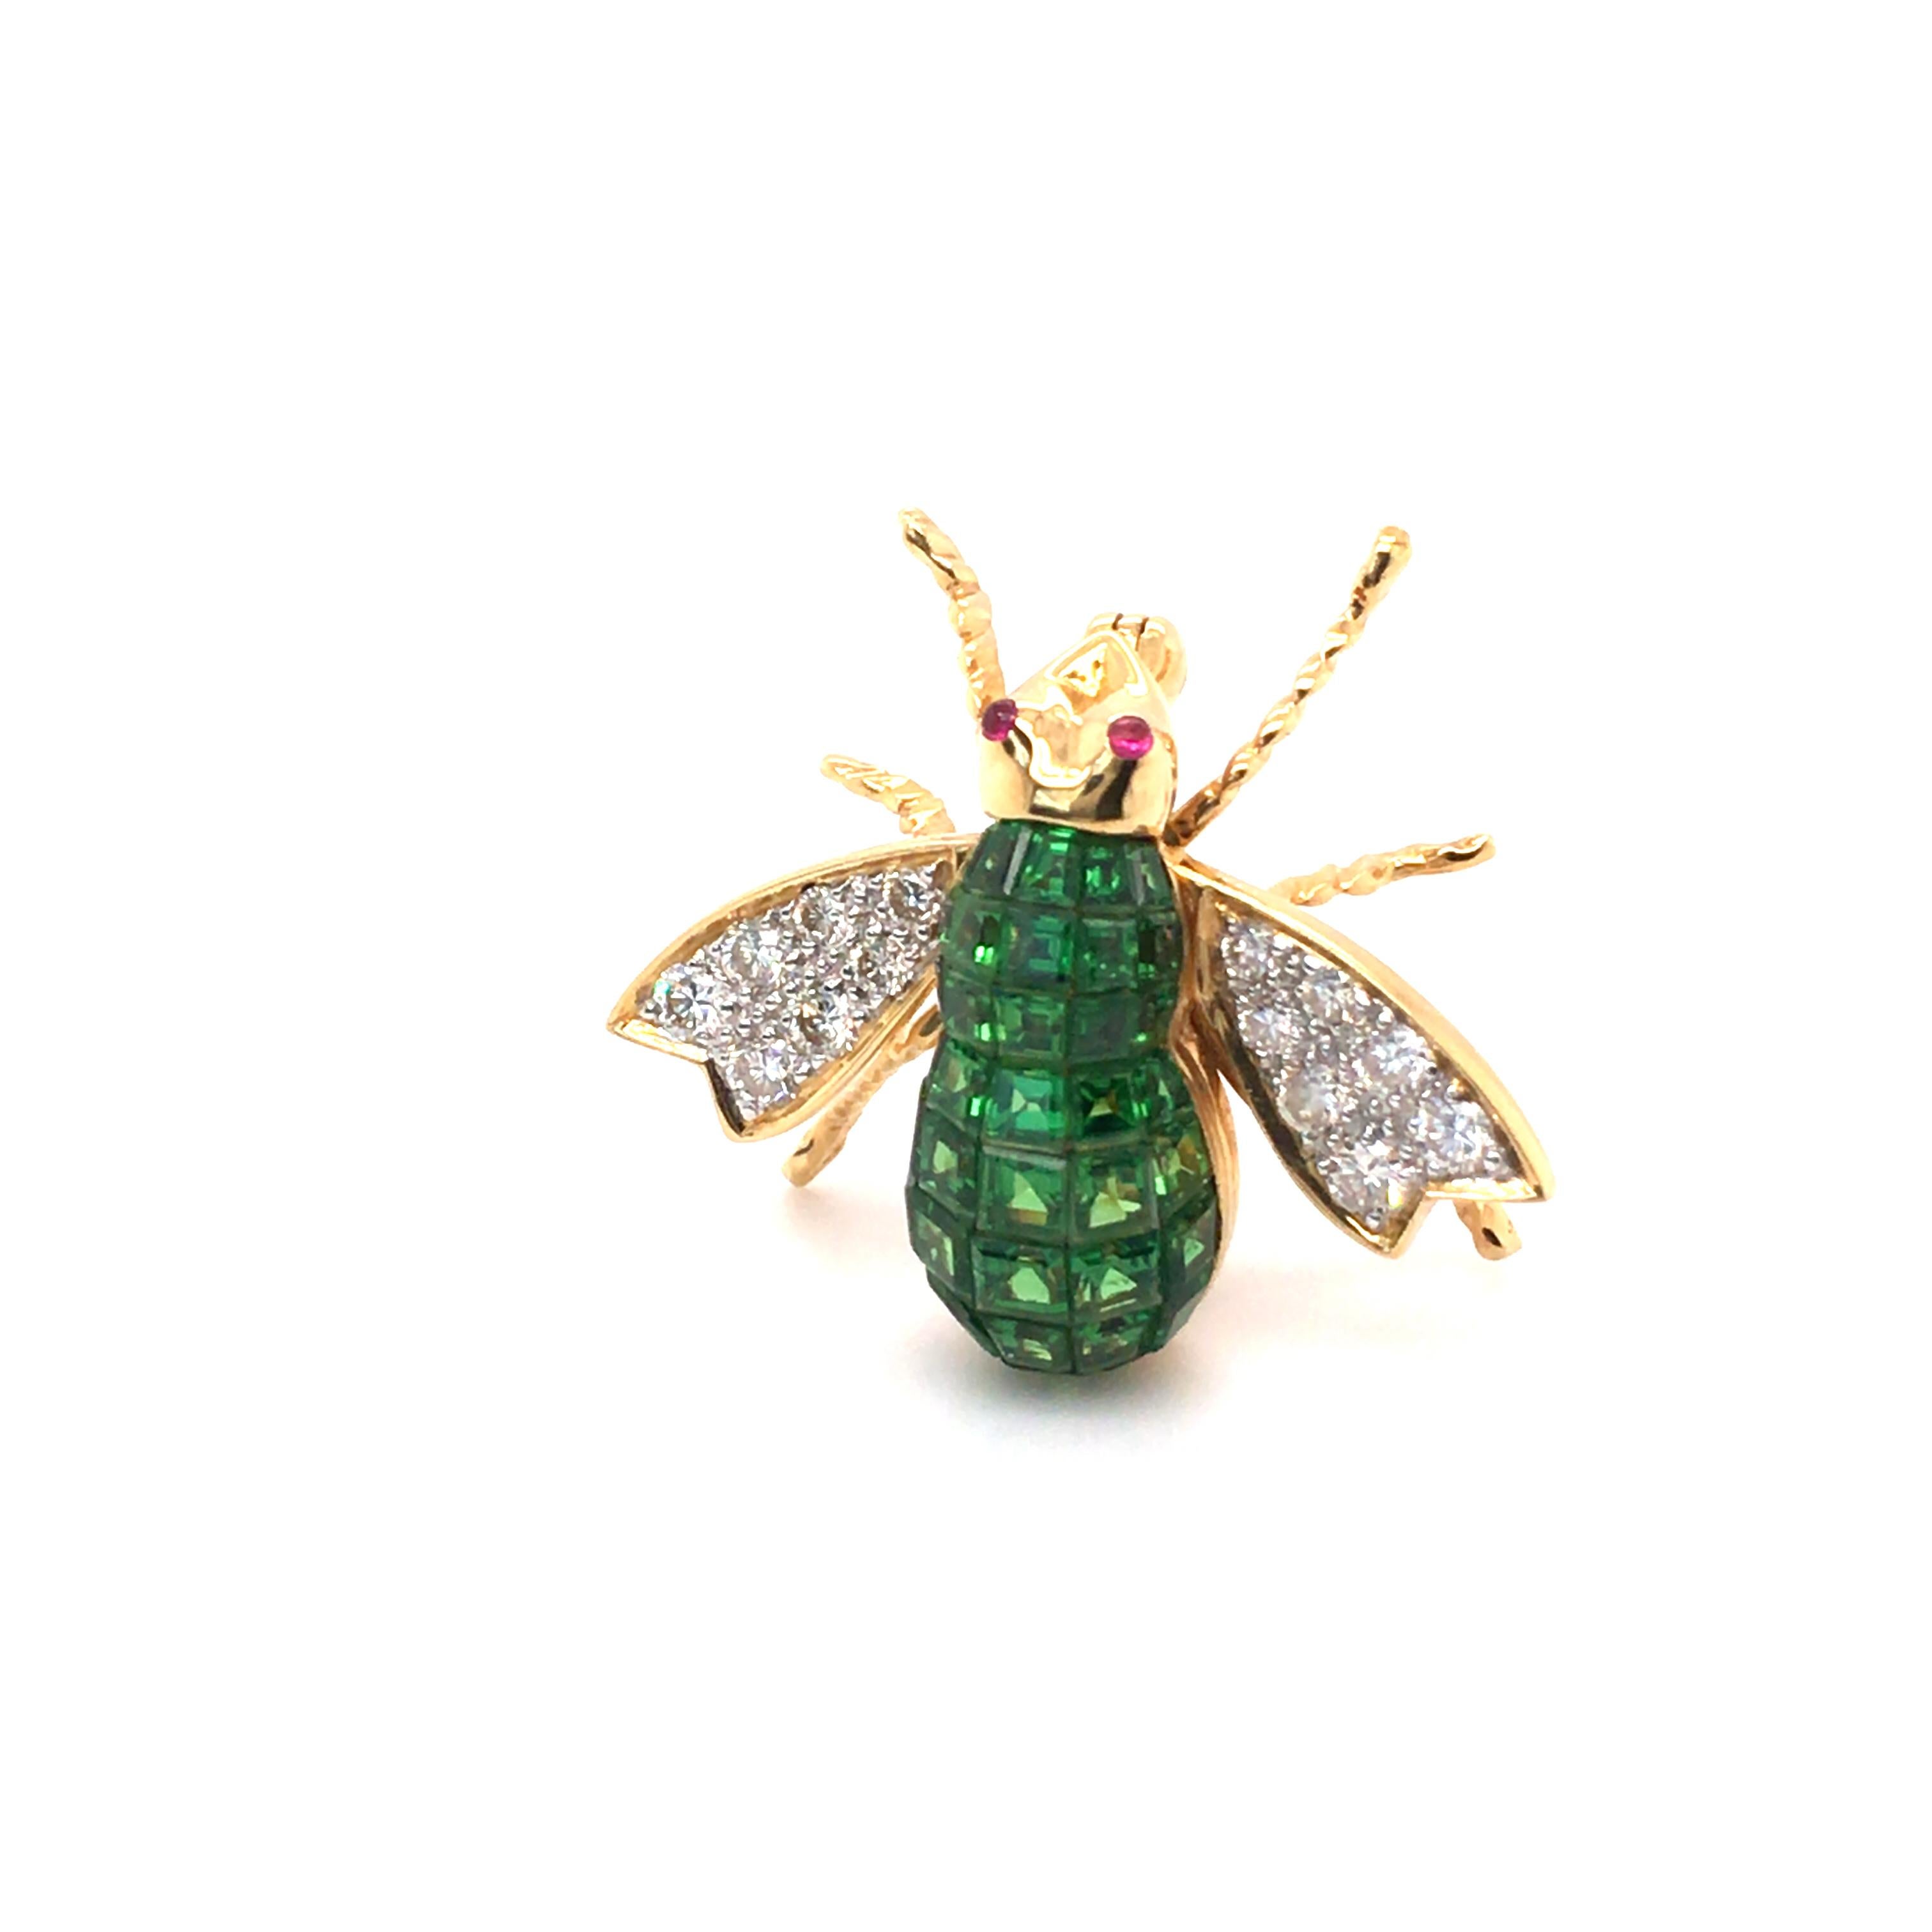 This charming insect brooch from the Haruni Vaults is handmade in 18k yellow gold with vibrant tsavorite garnets forming the body, pave-set sparkling diamonds in the wings, and round ruby cabochon eyes.